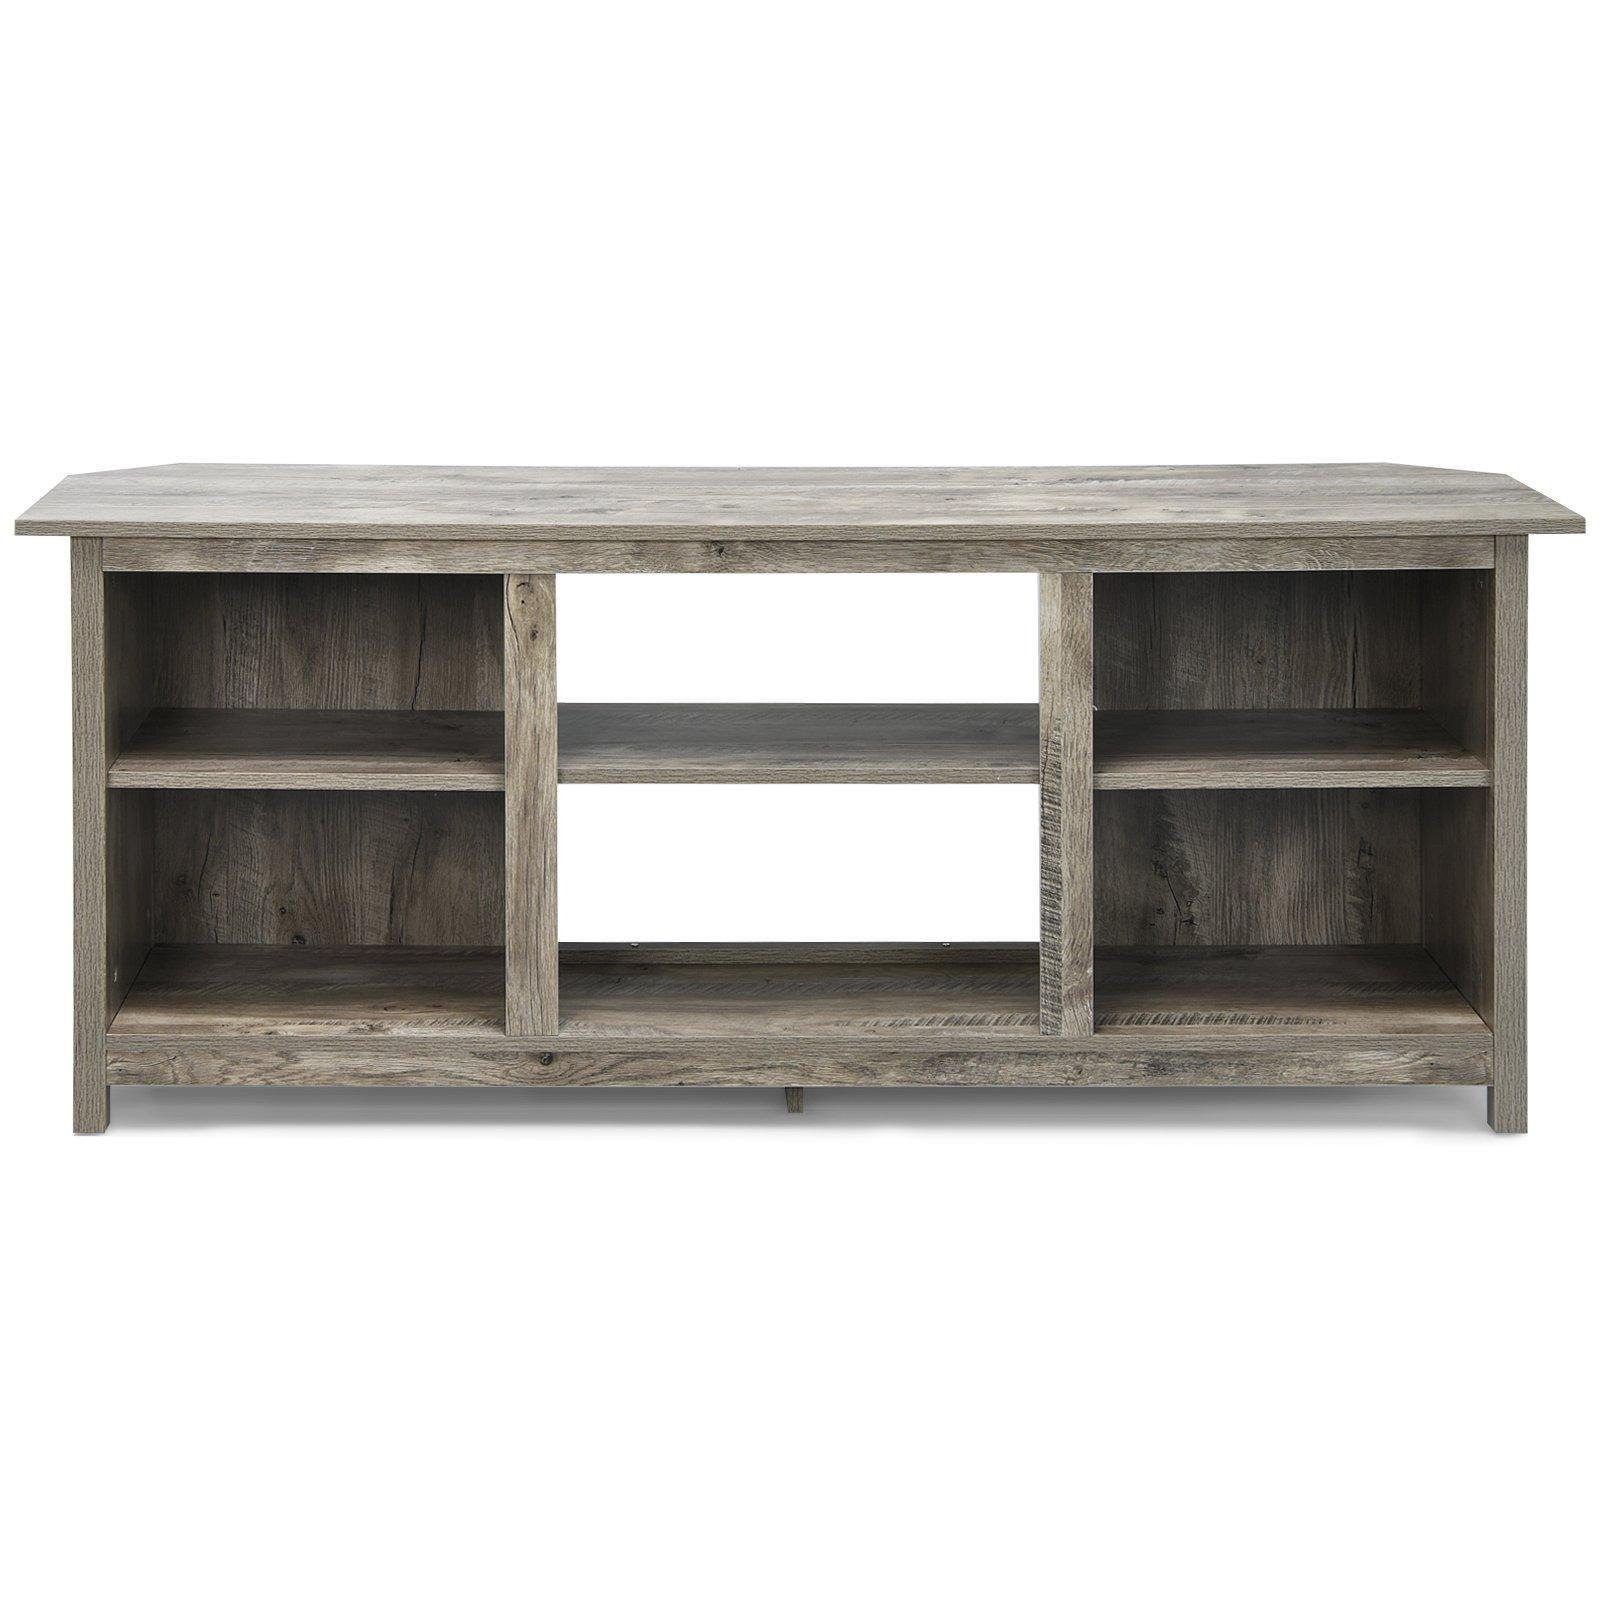 TV Stand for TVs up to 65 Inches Wooden Modern TV Console Table W/6 Open Storage - image 1